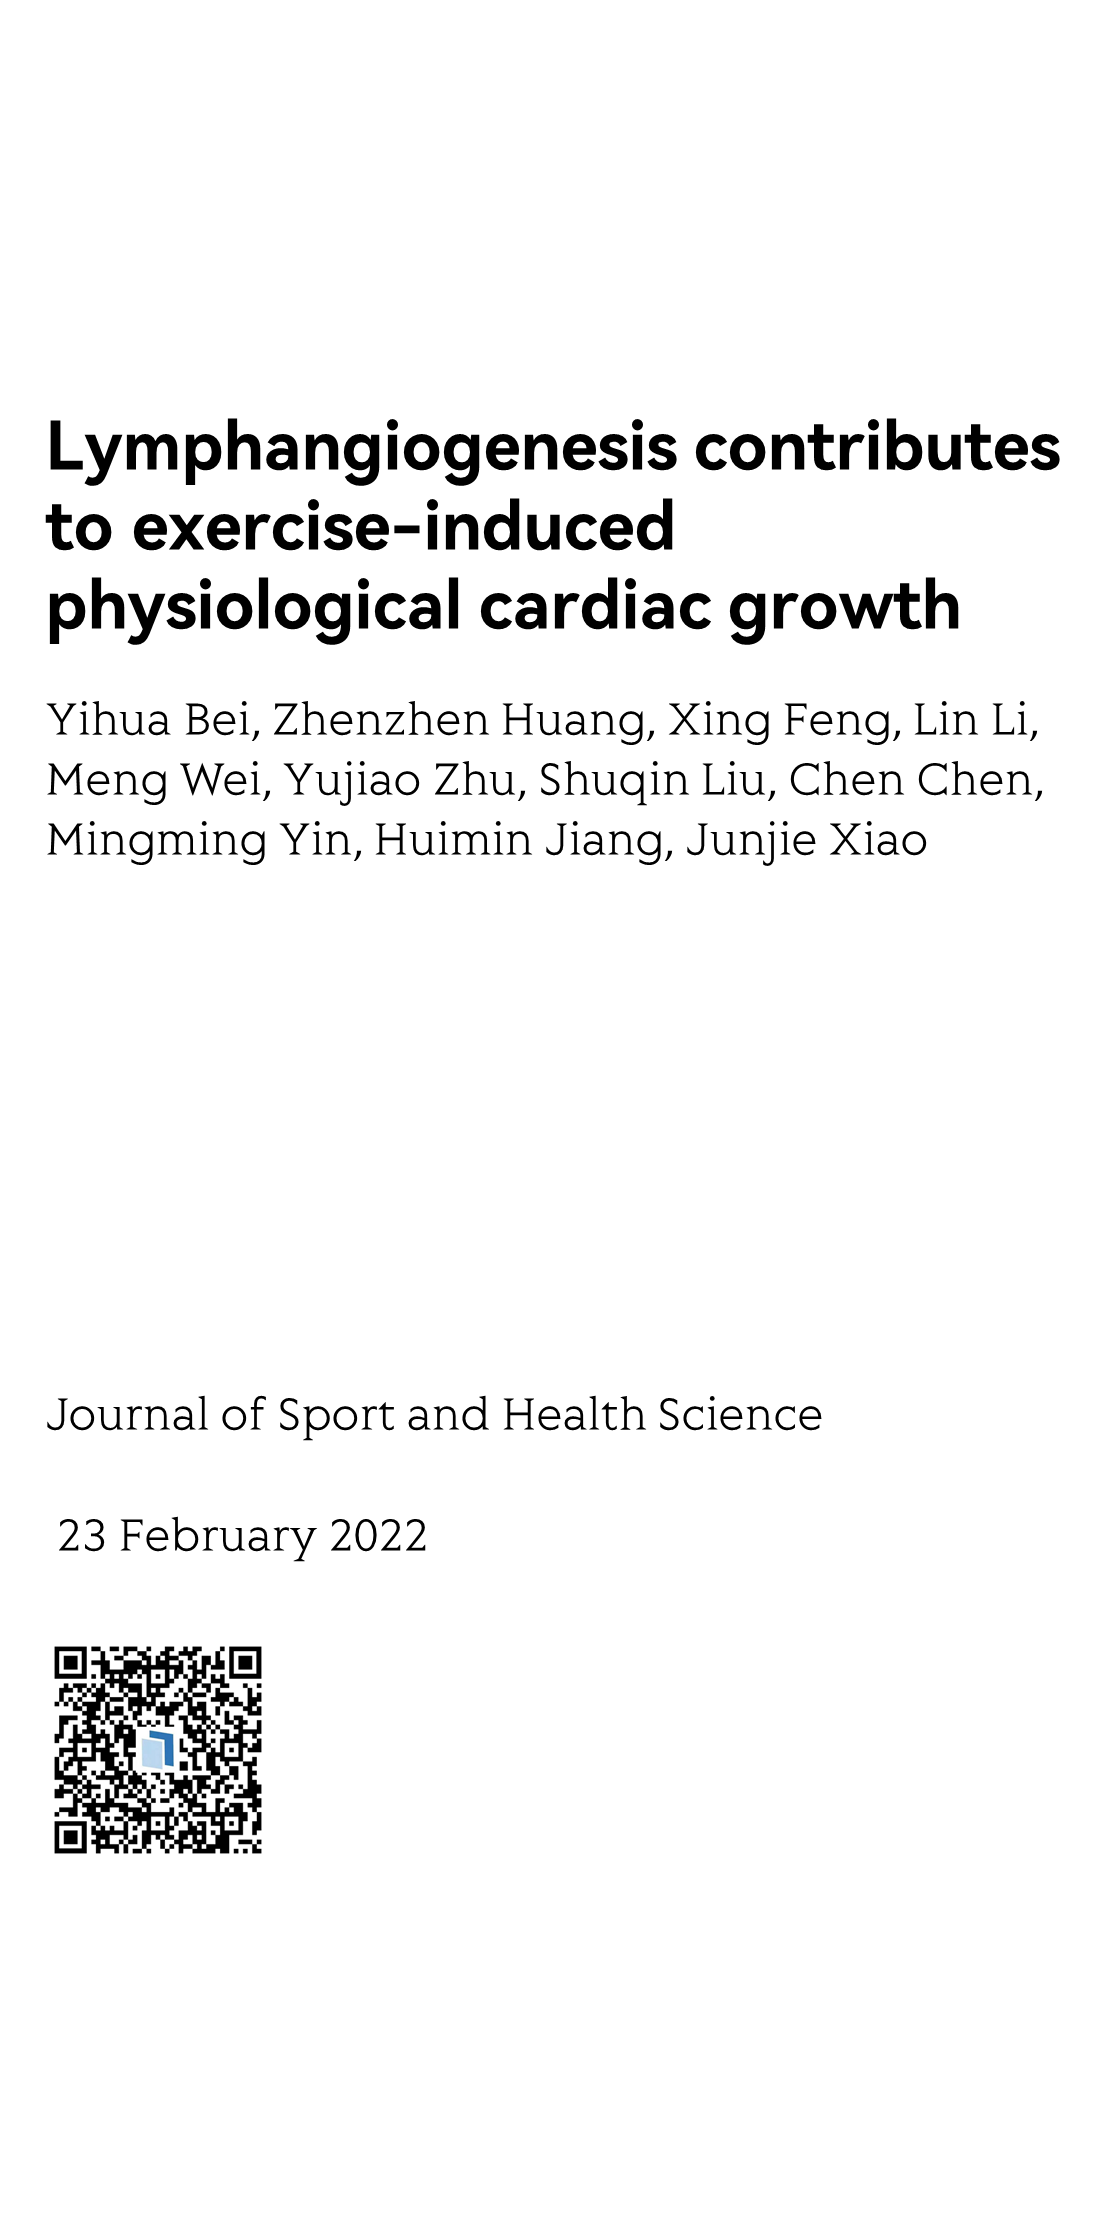 Lymphangiogenesis contributes to exercise-induced physiological cardiac growth_1